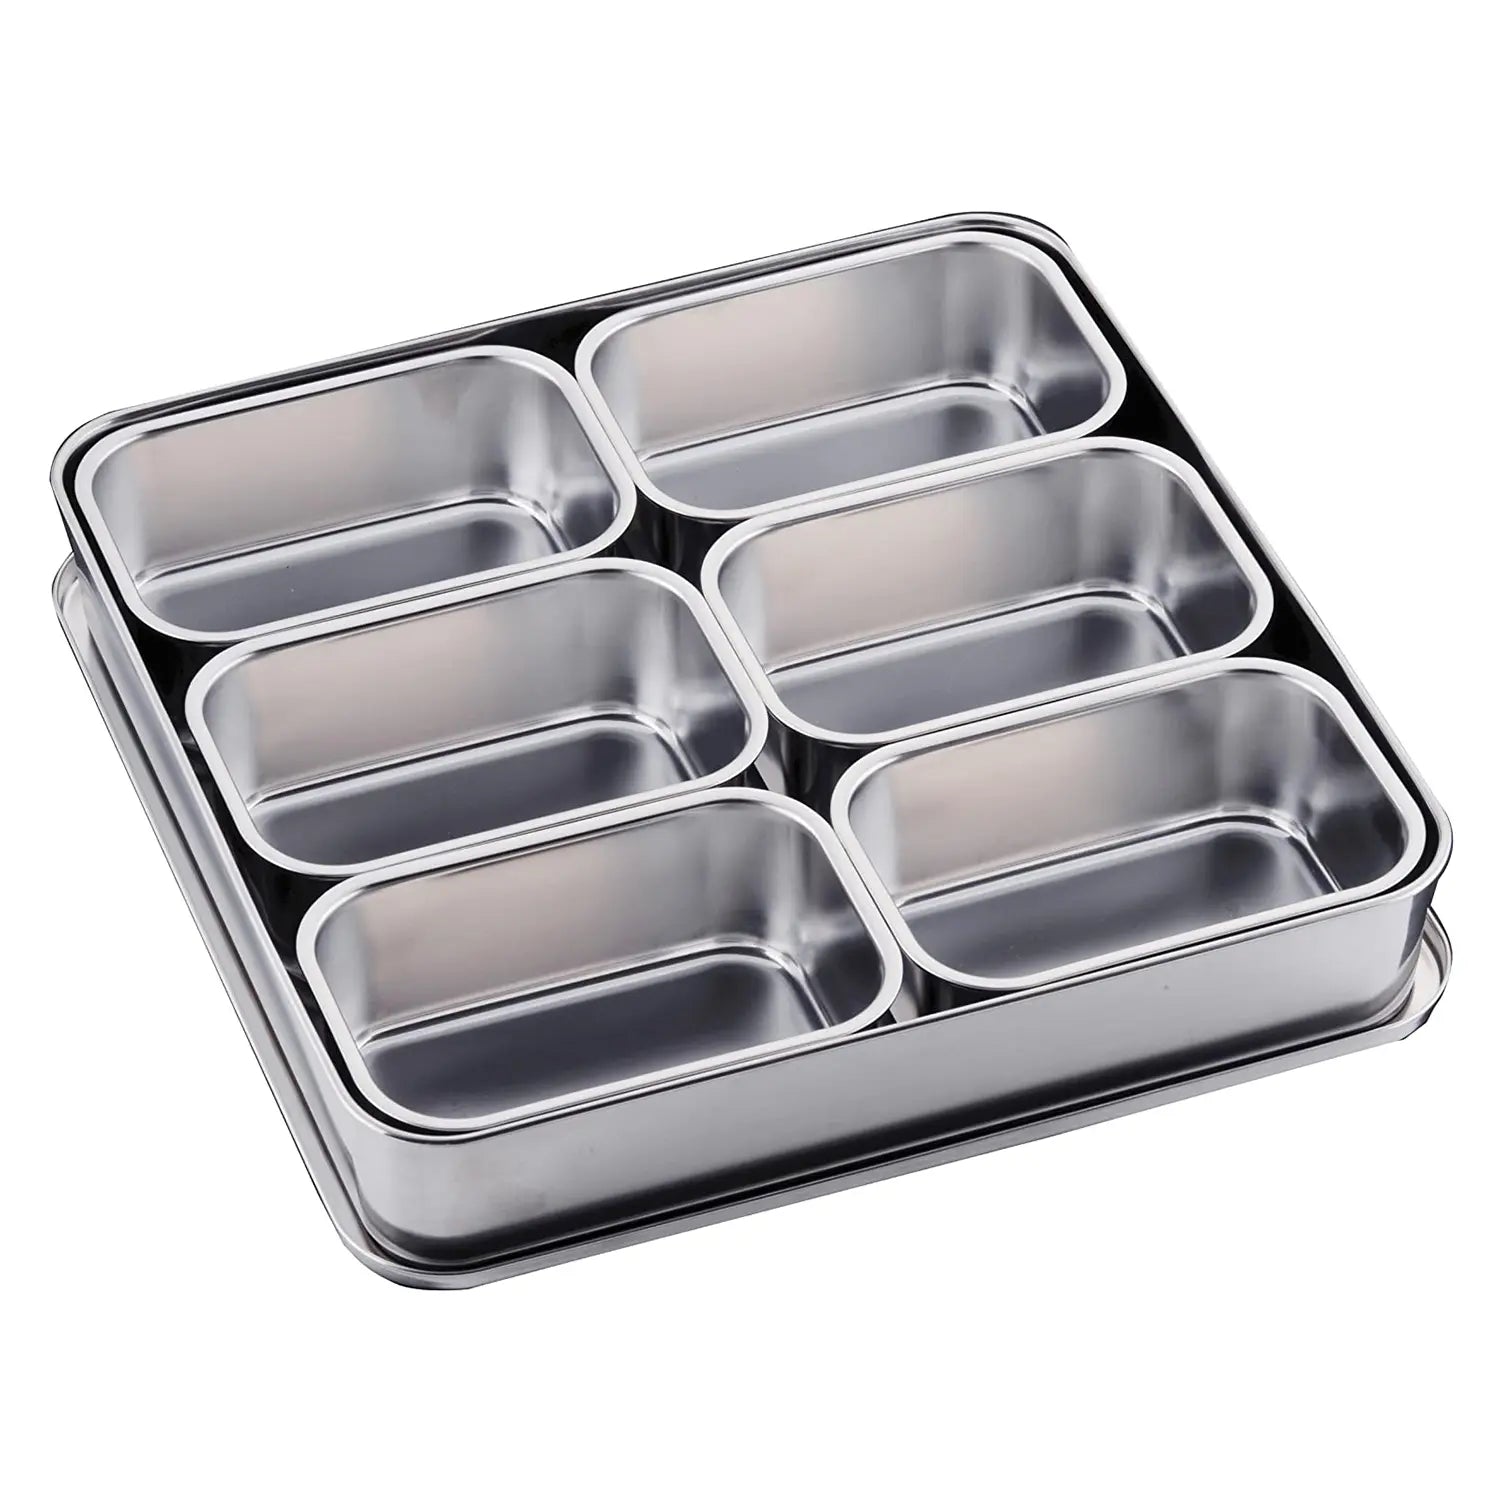 Large 6-Compartment Clover Stainless Steel Yakumi Seasoning Container